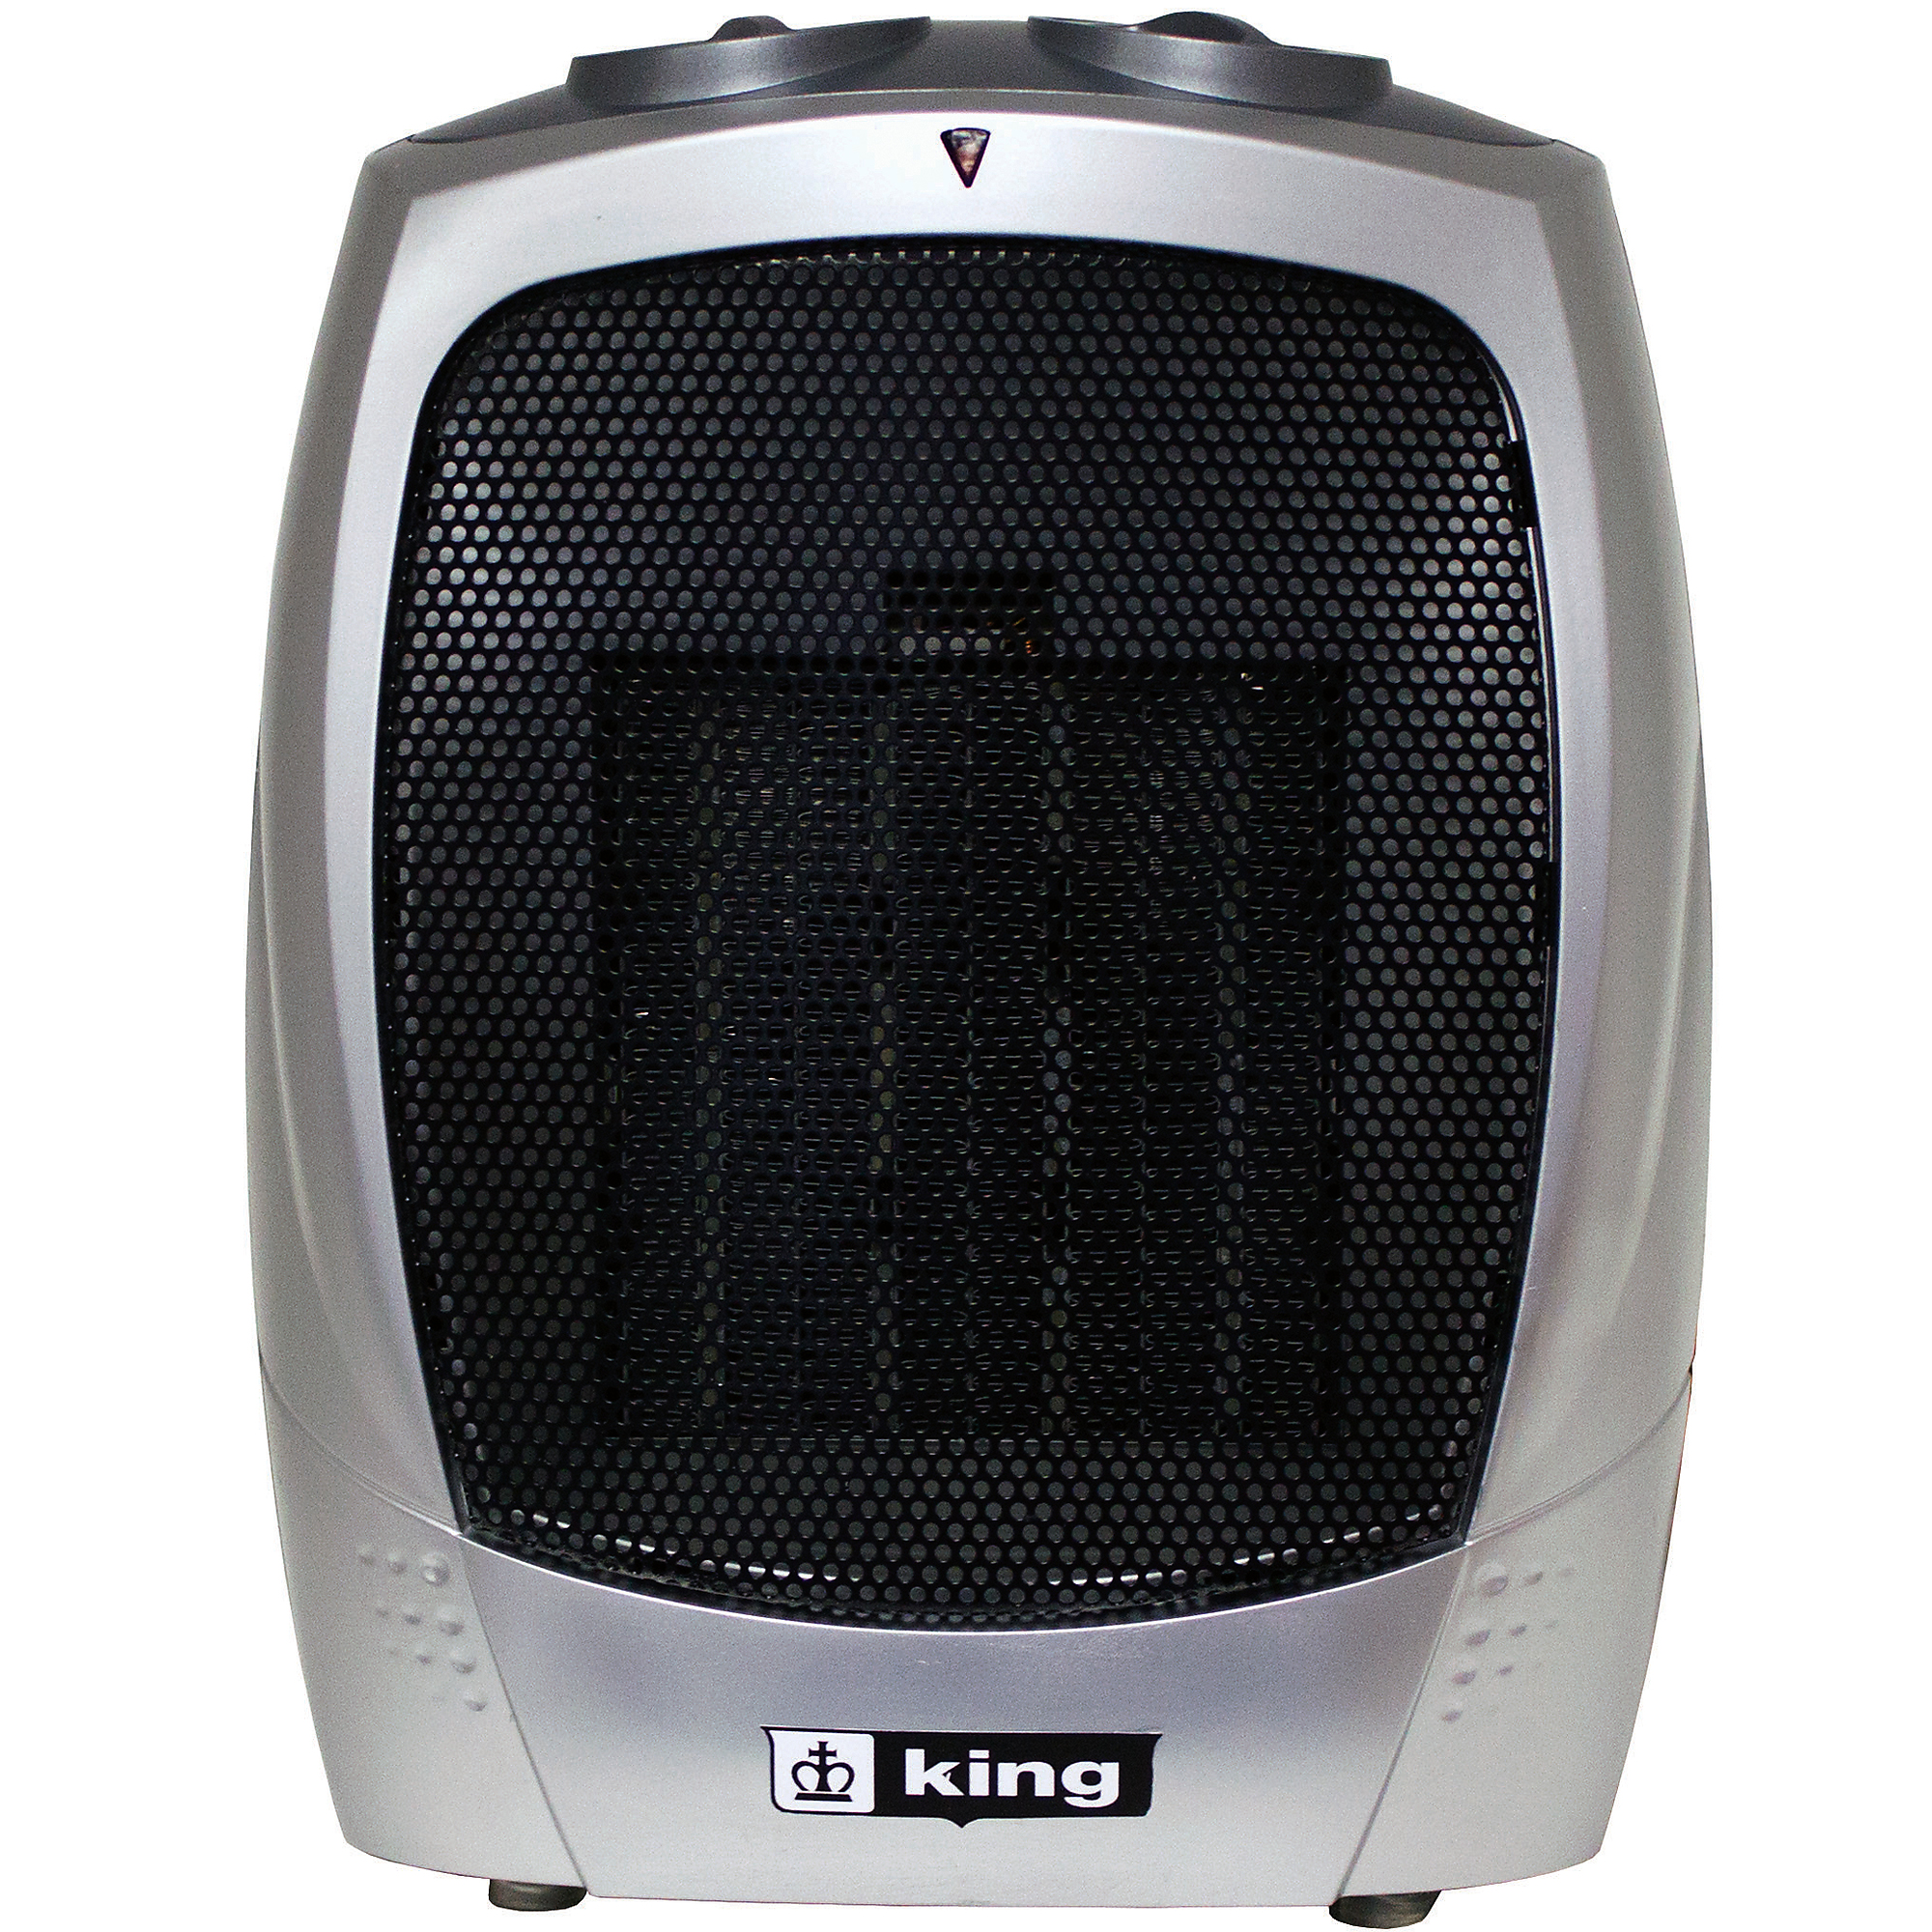 Electrical, Portable Heater, Heat Type Forced Air, Heat Output 5118 Btu/hour, Heating Capability 150 ft², Model - KING PH-2